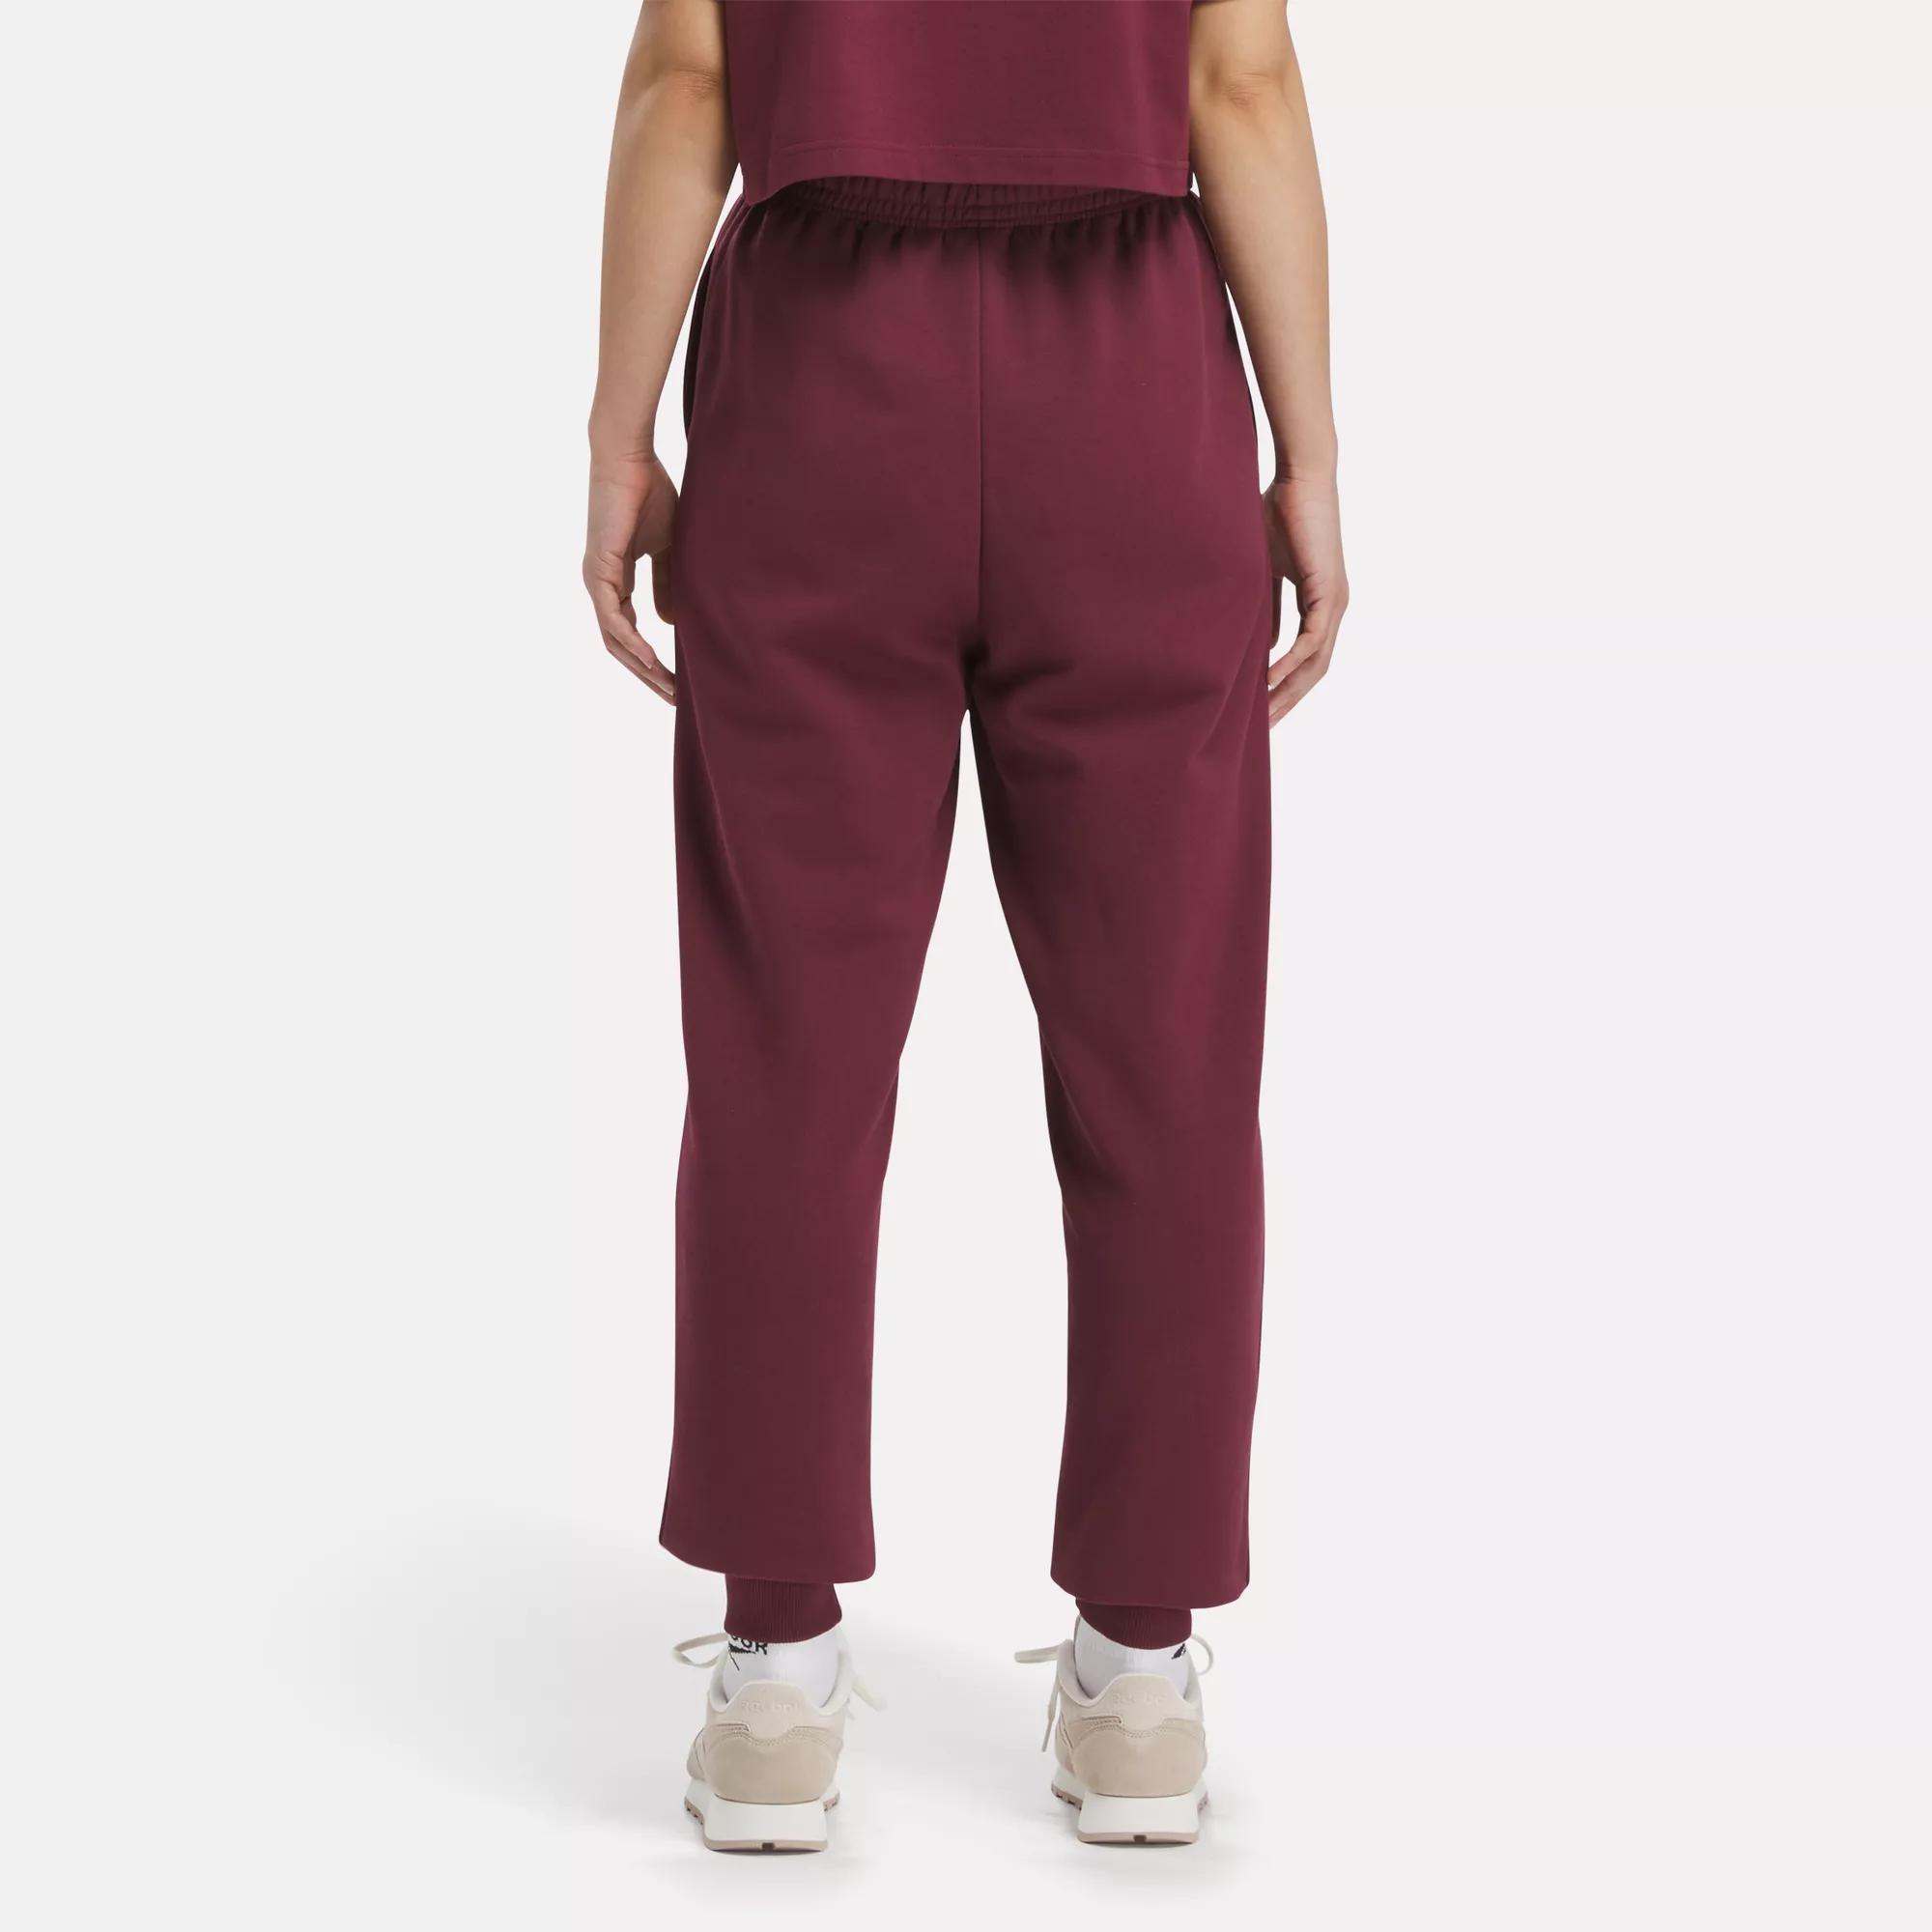 Reebok Women's Pull-on Drawstring Tricot Pants, A Macy's Exclusive In  Classic Maroon F